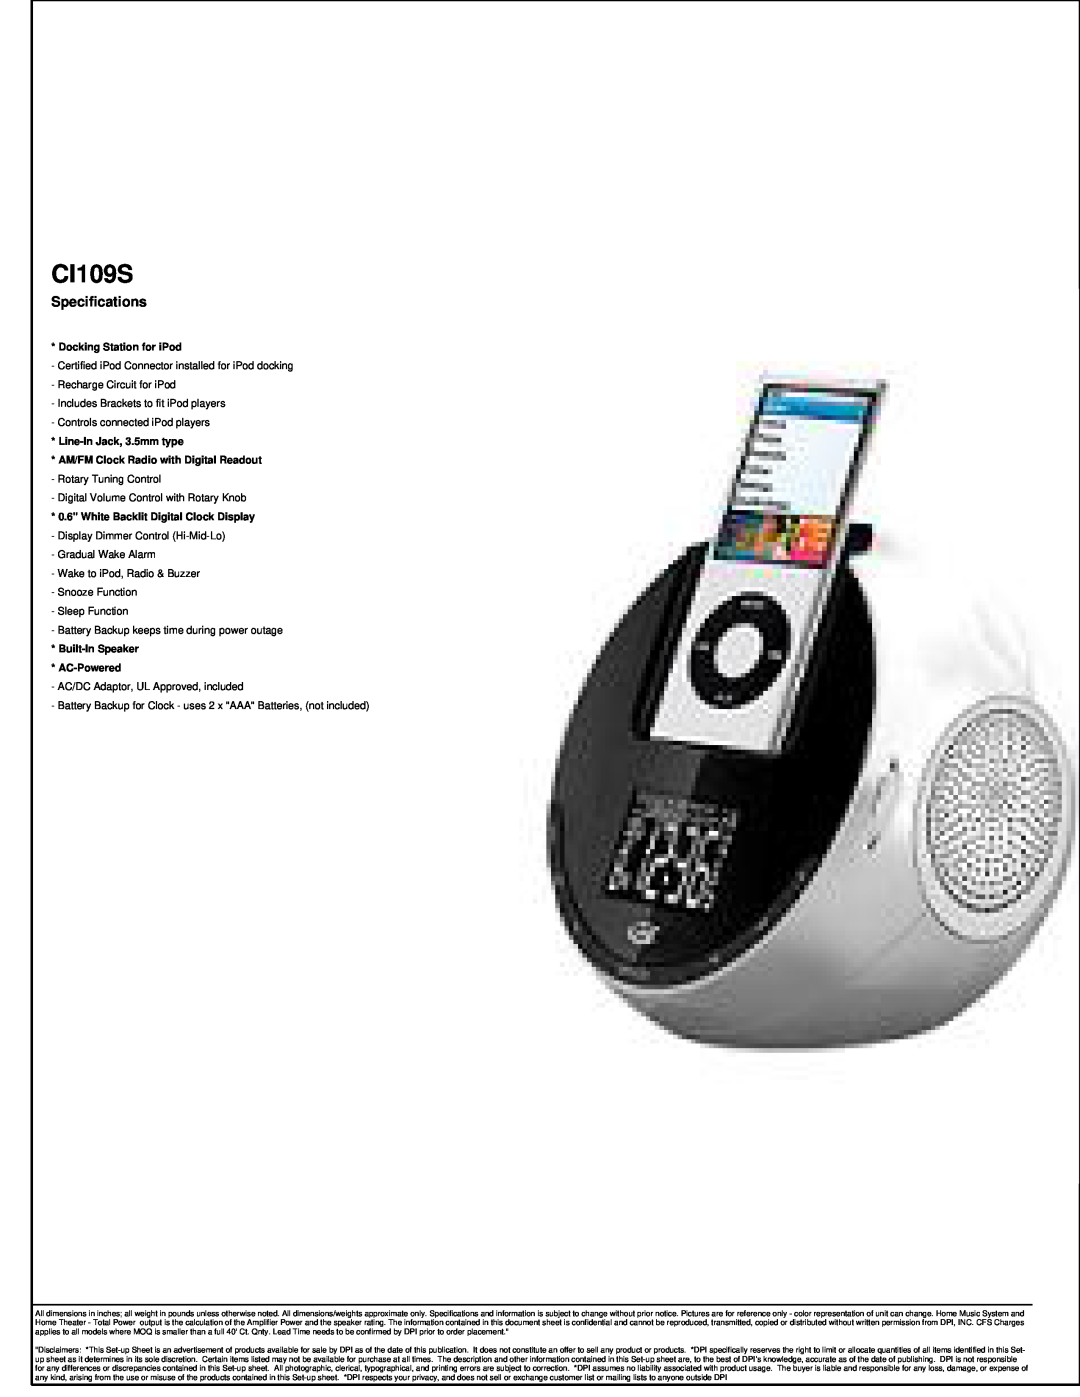 GPX CI109S, Specifications, Docking Station for iPod, Line-InJack, 3.5mm type, AM/FM Clock Radio with Digital Readout 